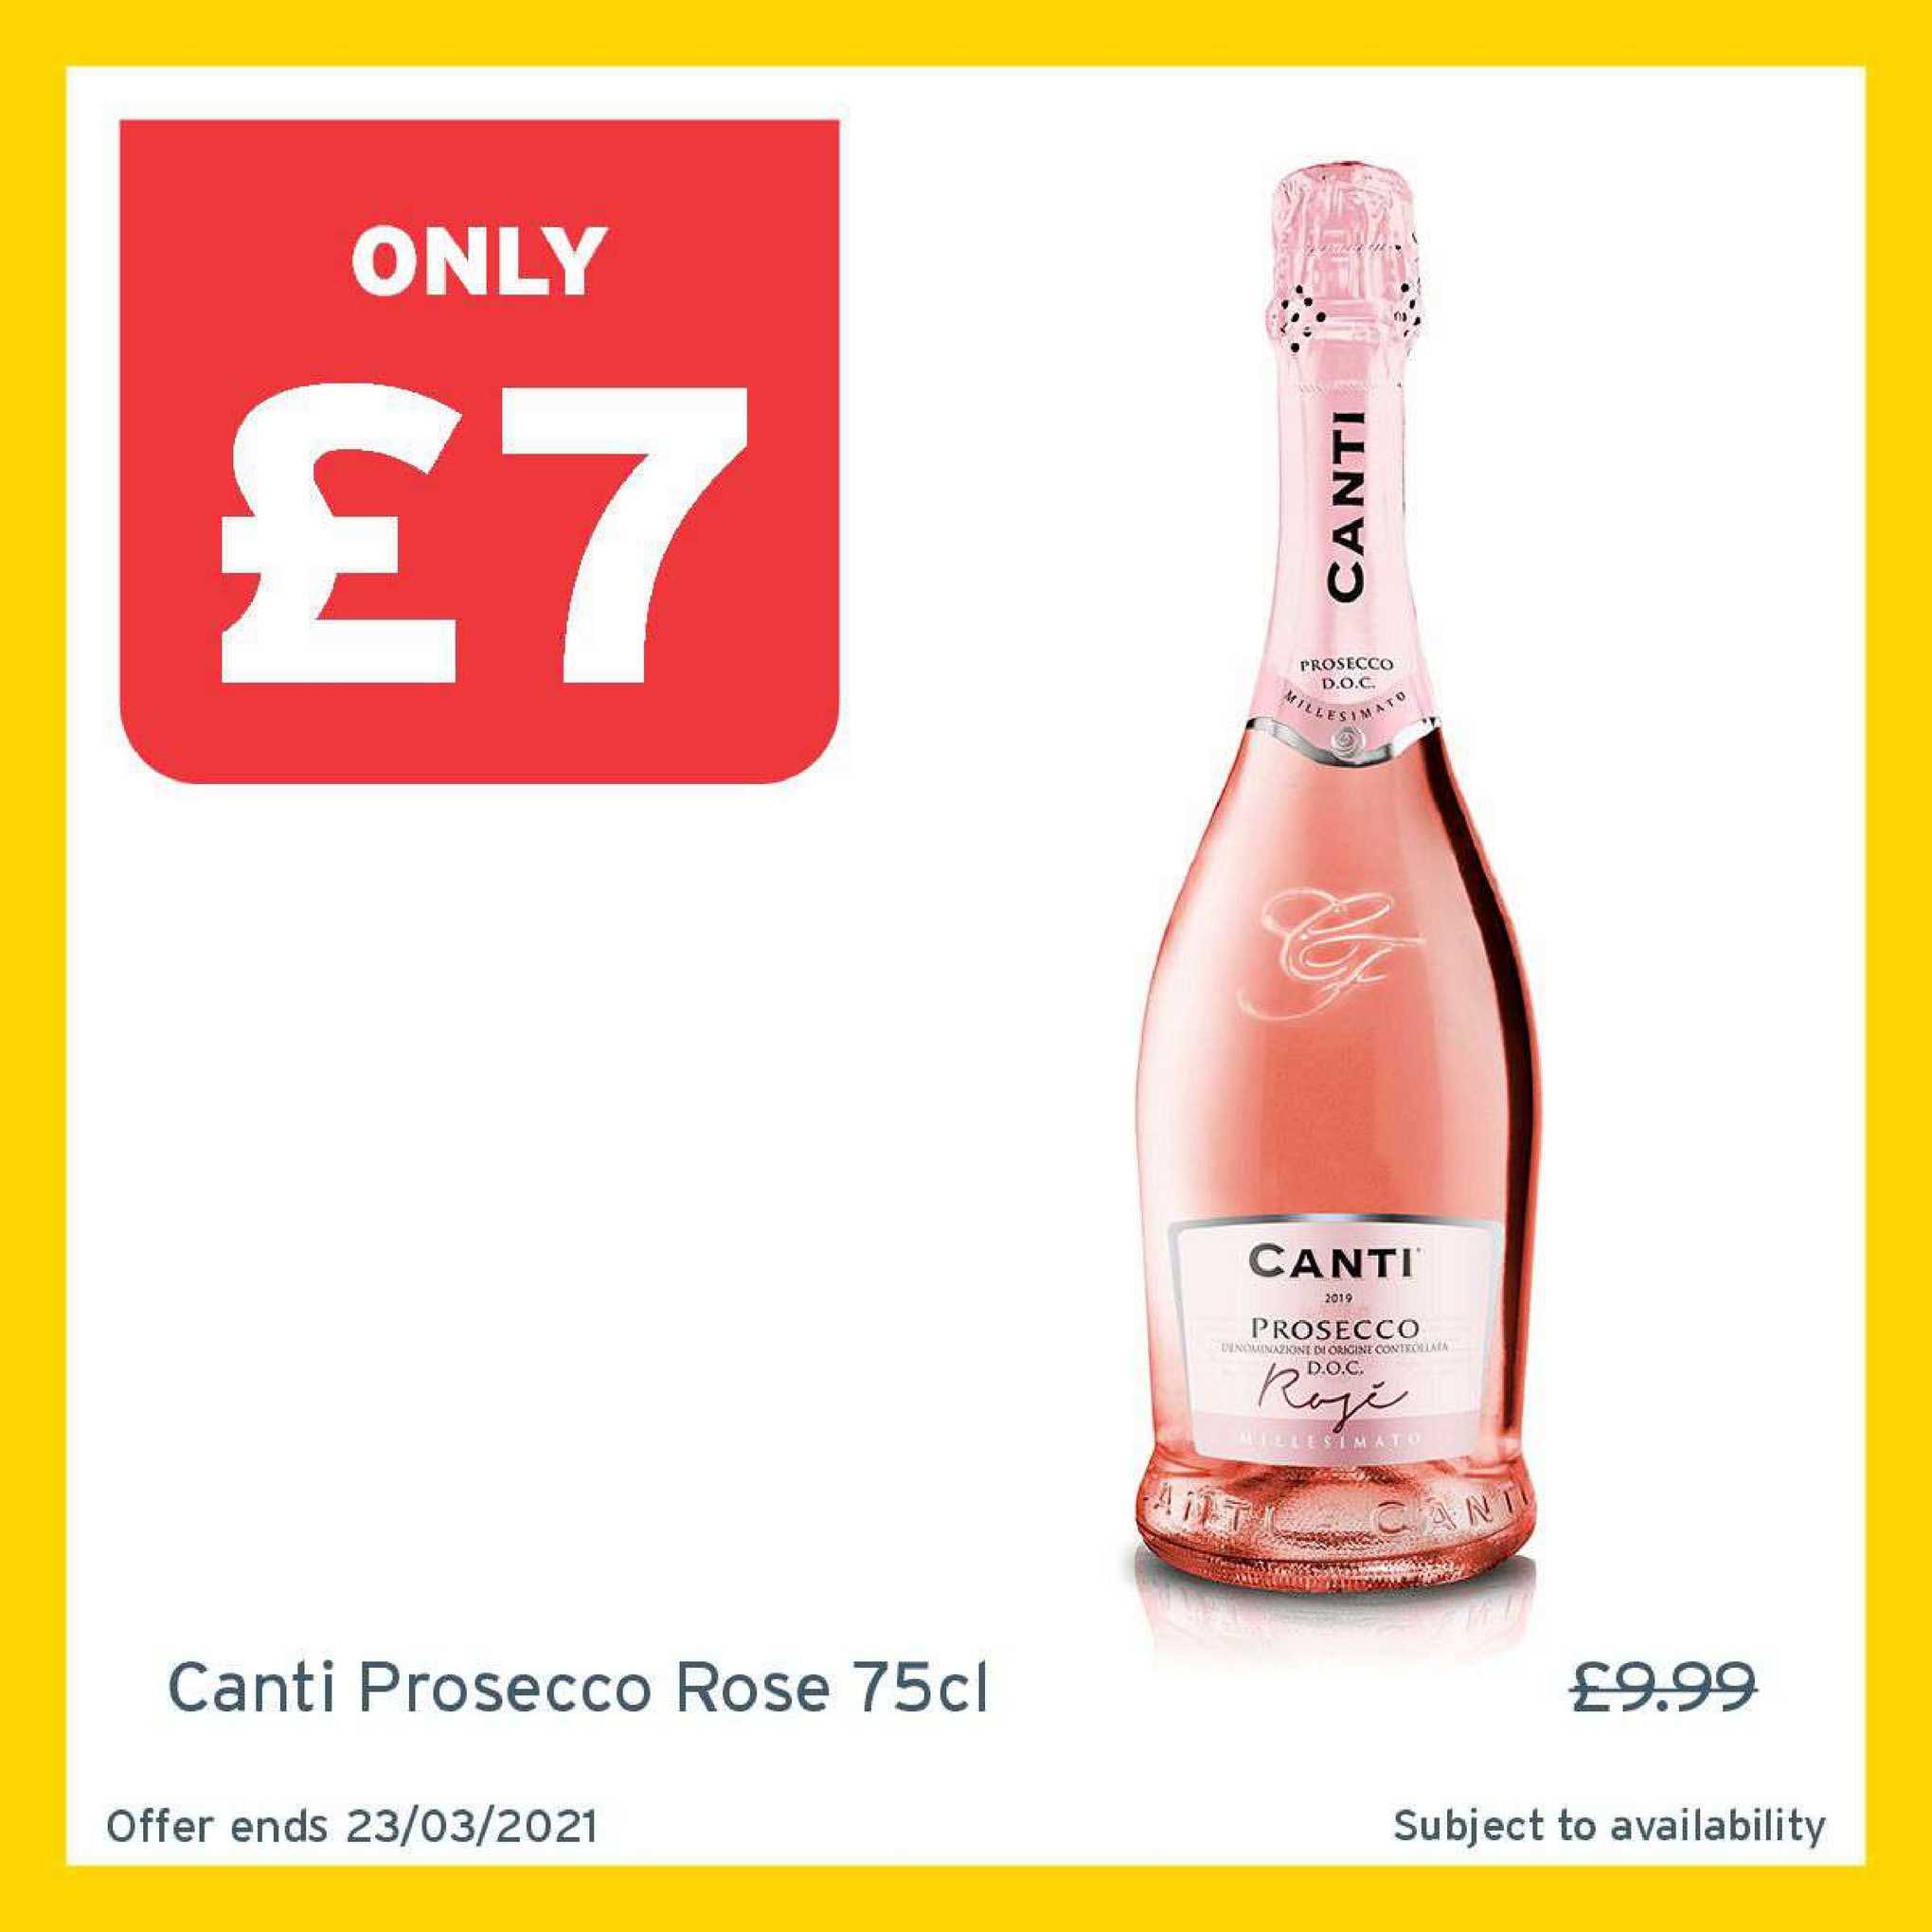 One Stop Canti Prosecco Rose 75cl